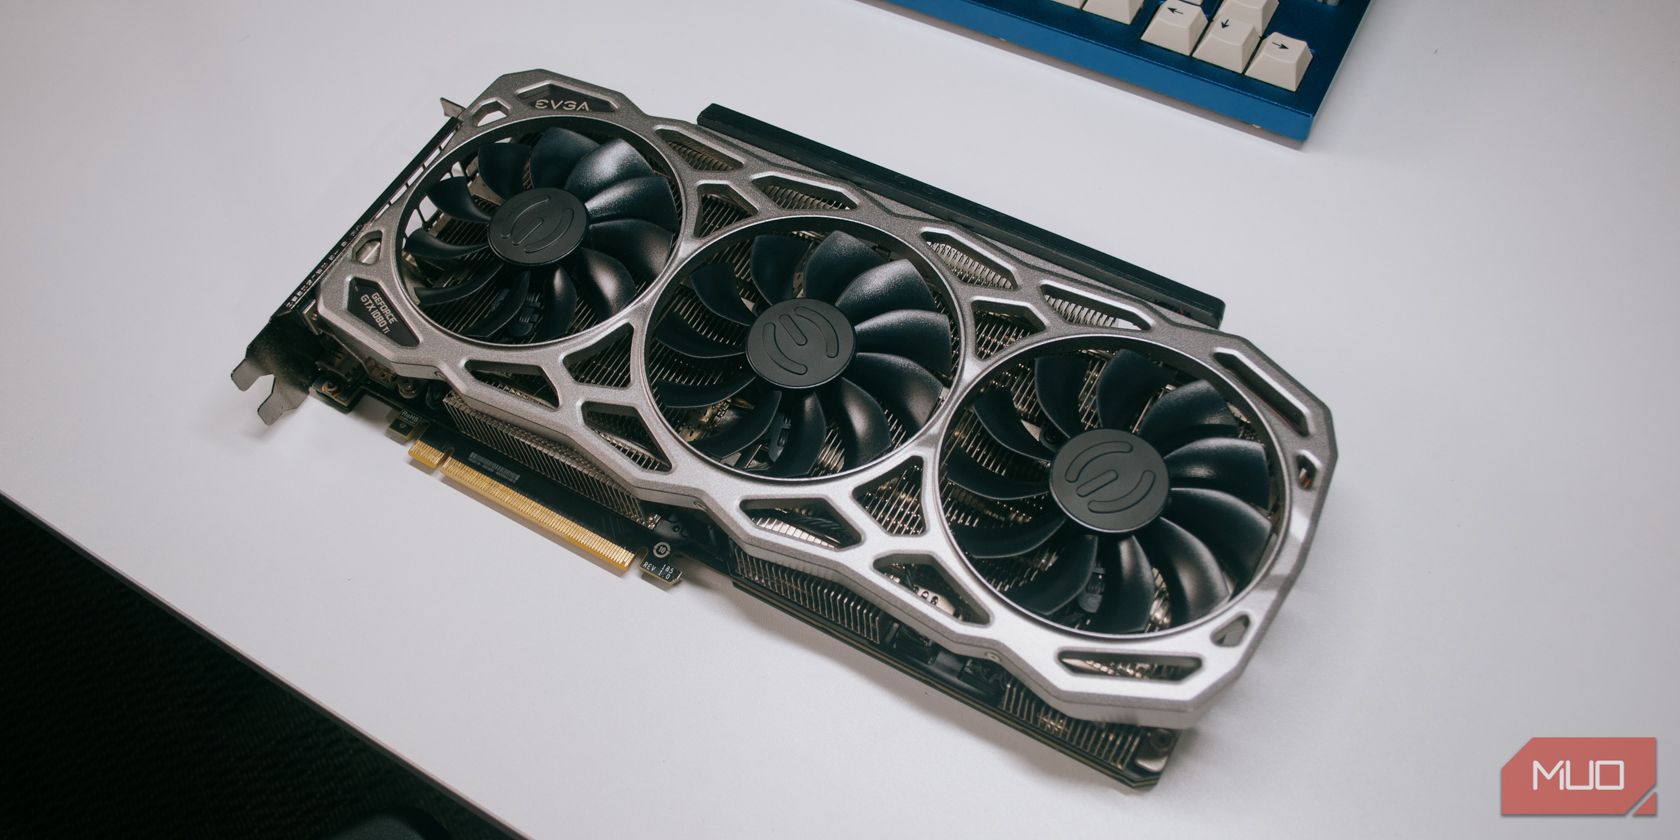 How to Reapply Thermal Paste on Your Graphics Card to Improve Performance